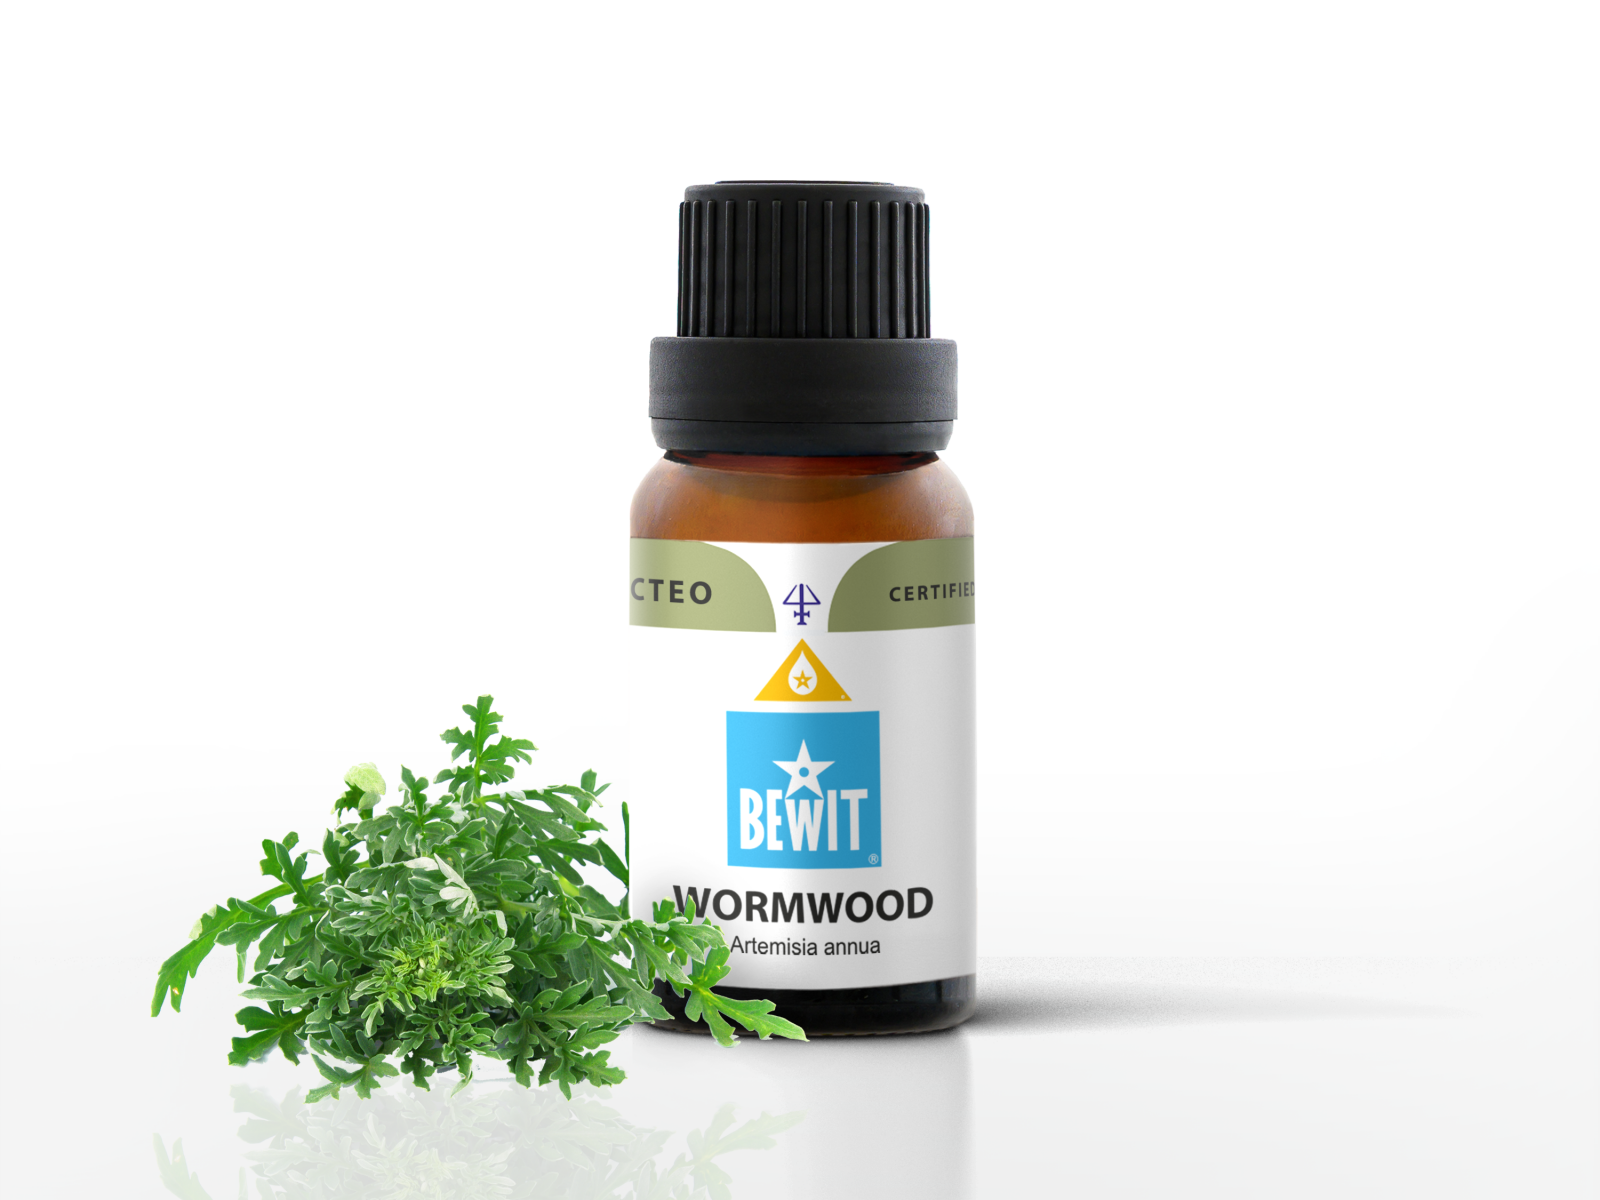 BEWIT Wormwood - 100% pure essential oil